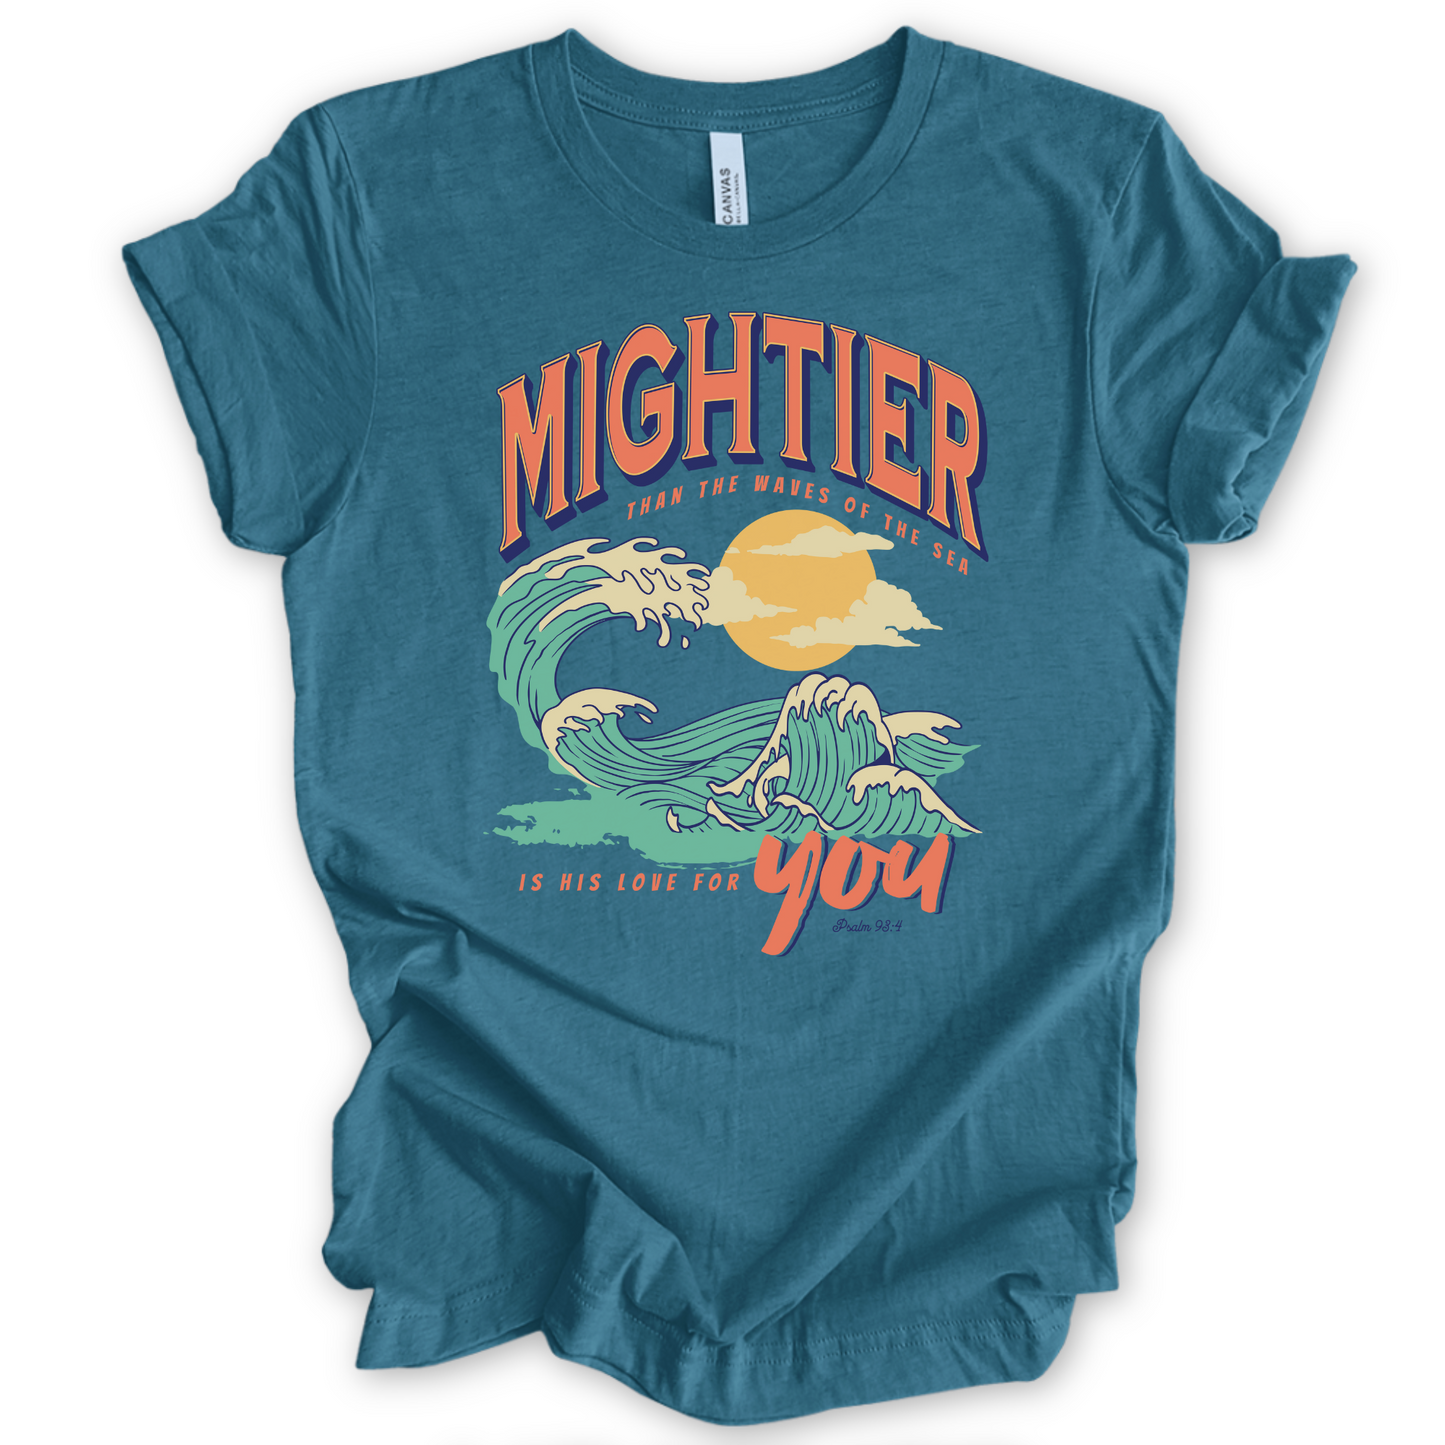 Mightier than the waves of the sea is his love for you tee